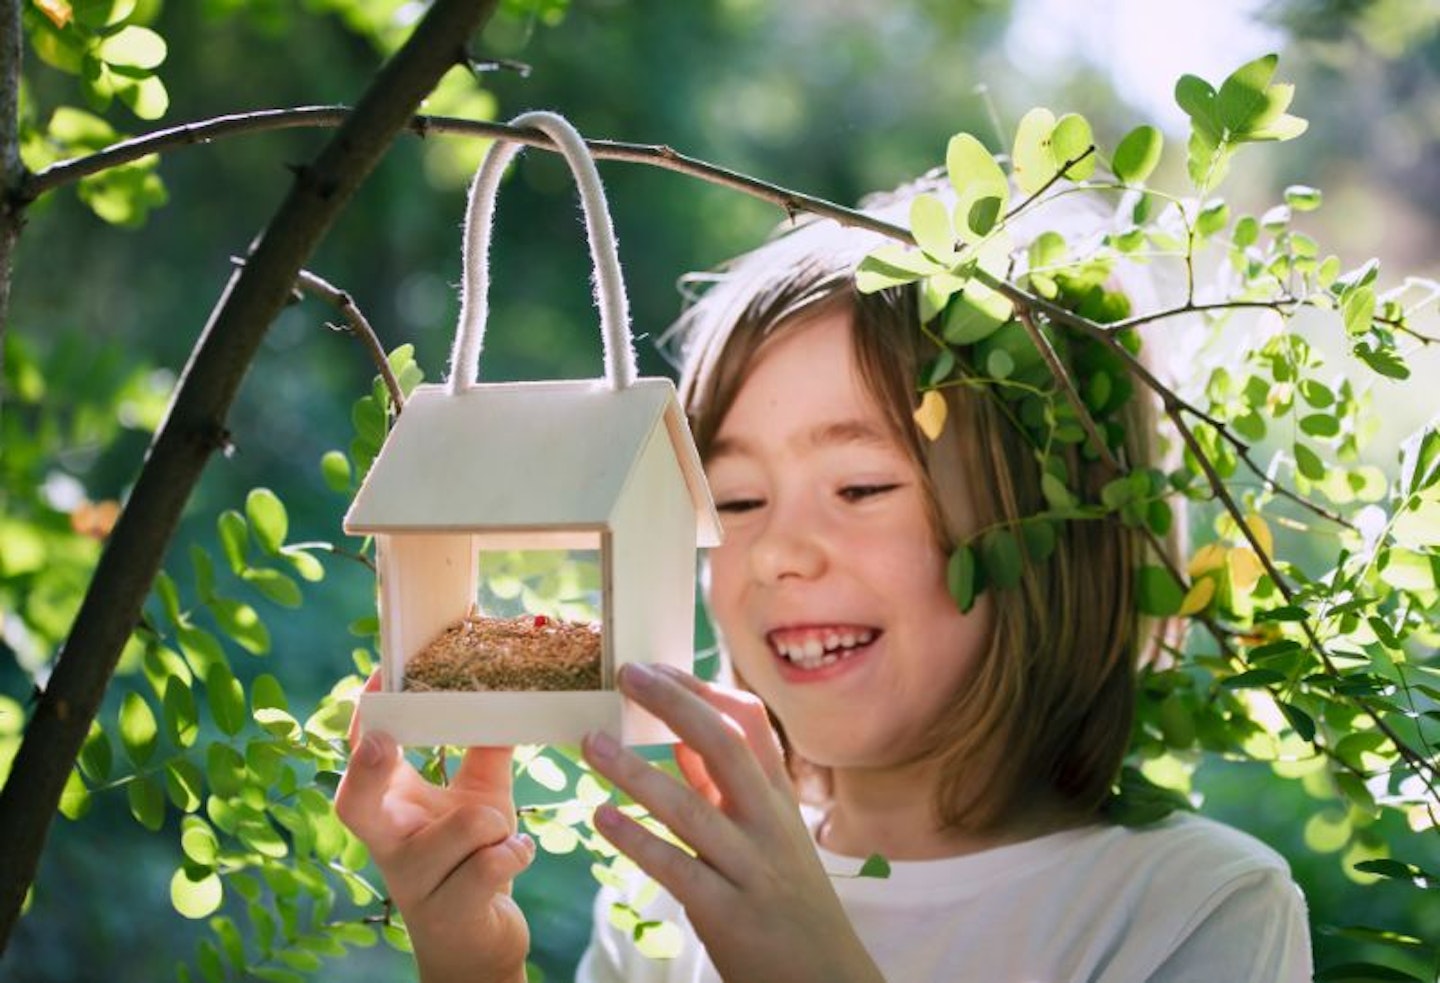 Smiling child checking a bird feeder hanging from a tree branch in the garden